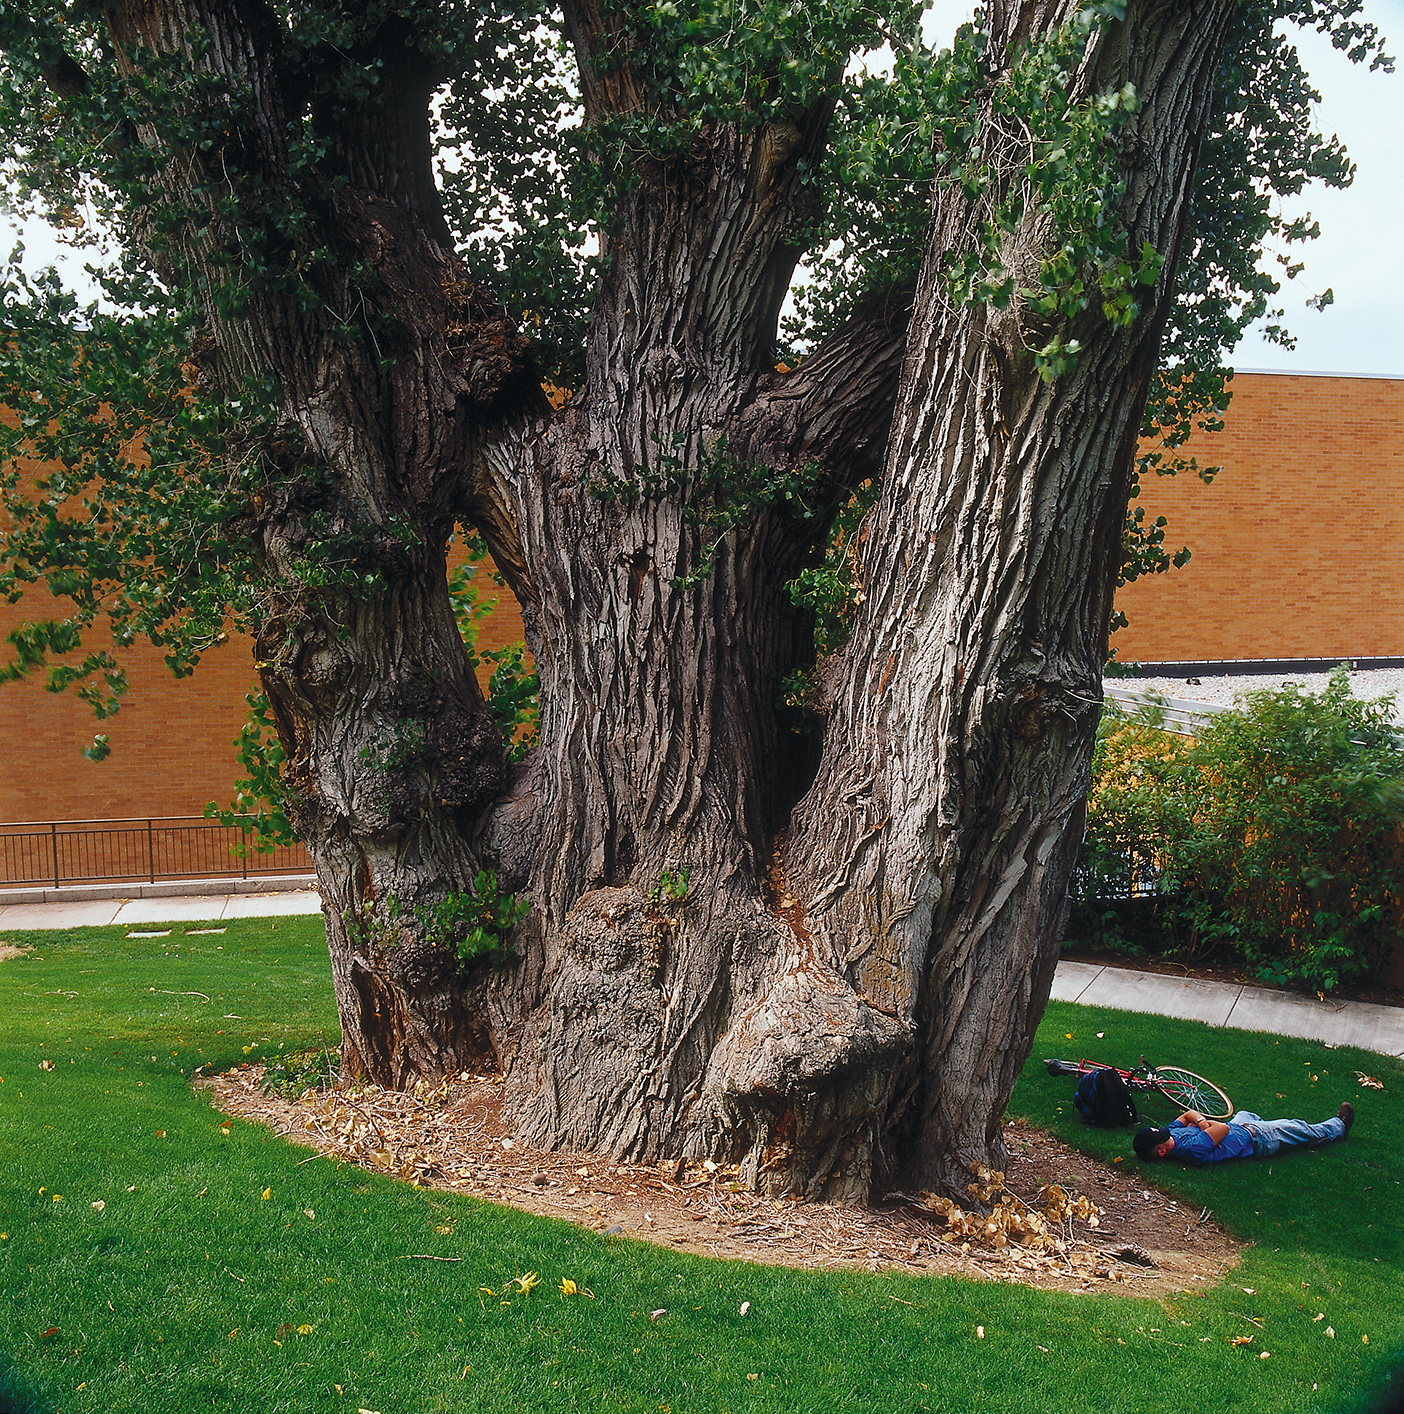 A photo of a Fremont Cottonwood tree with a person sleeping next to it.